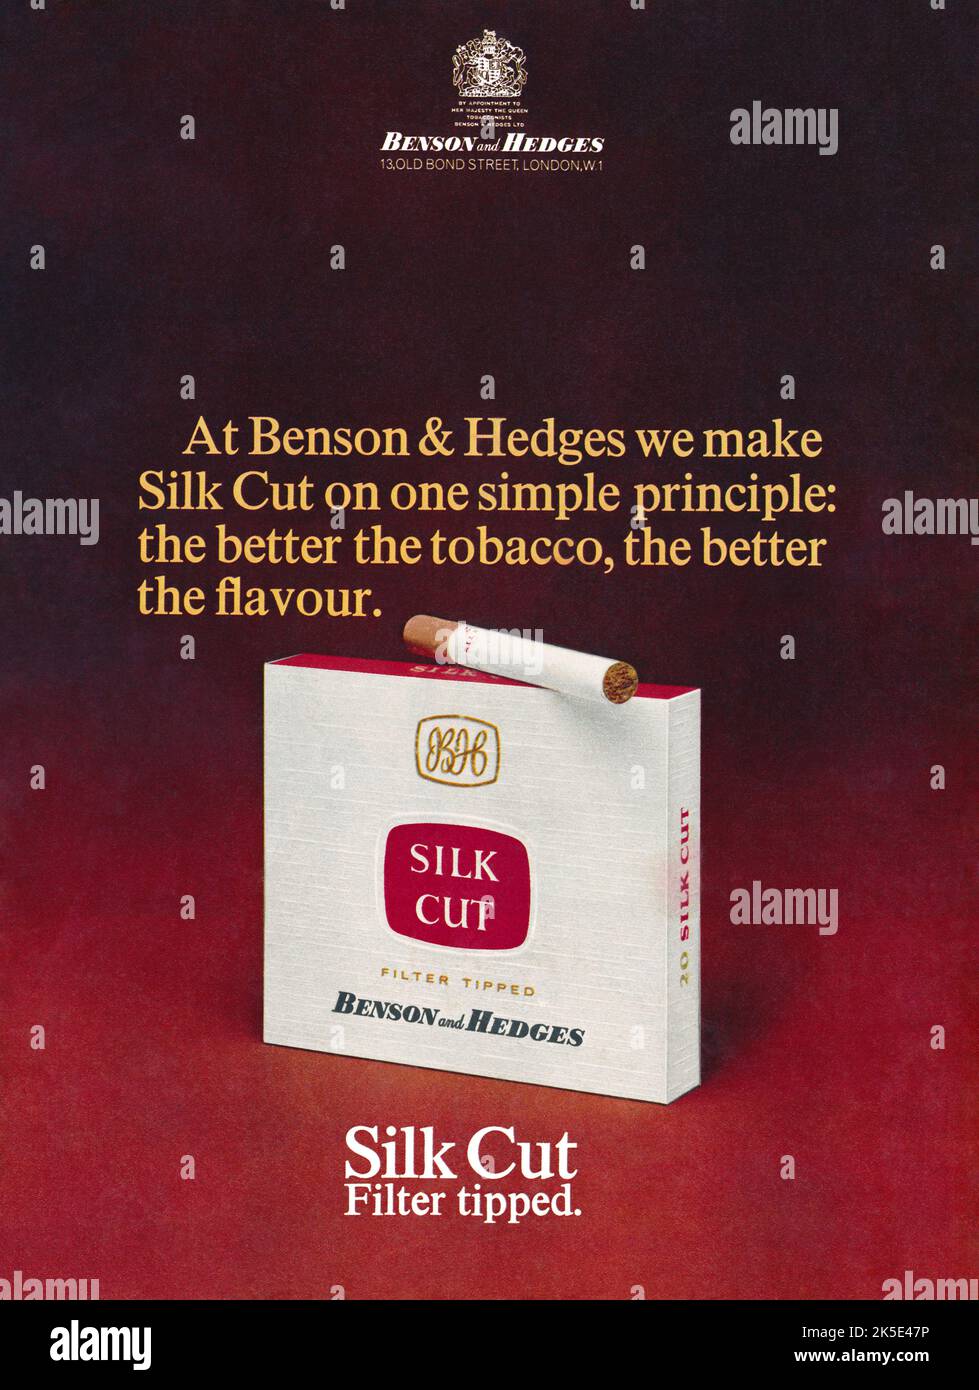 1965 British advertisement for Benson & Hedges filter tipped Silk Cut cigarettes. Stock Photo